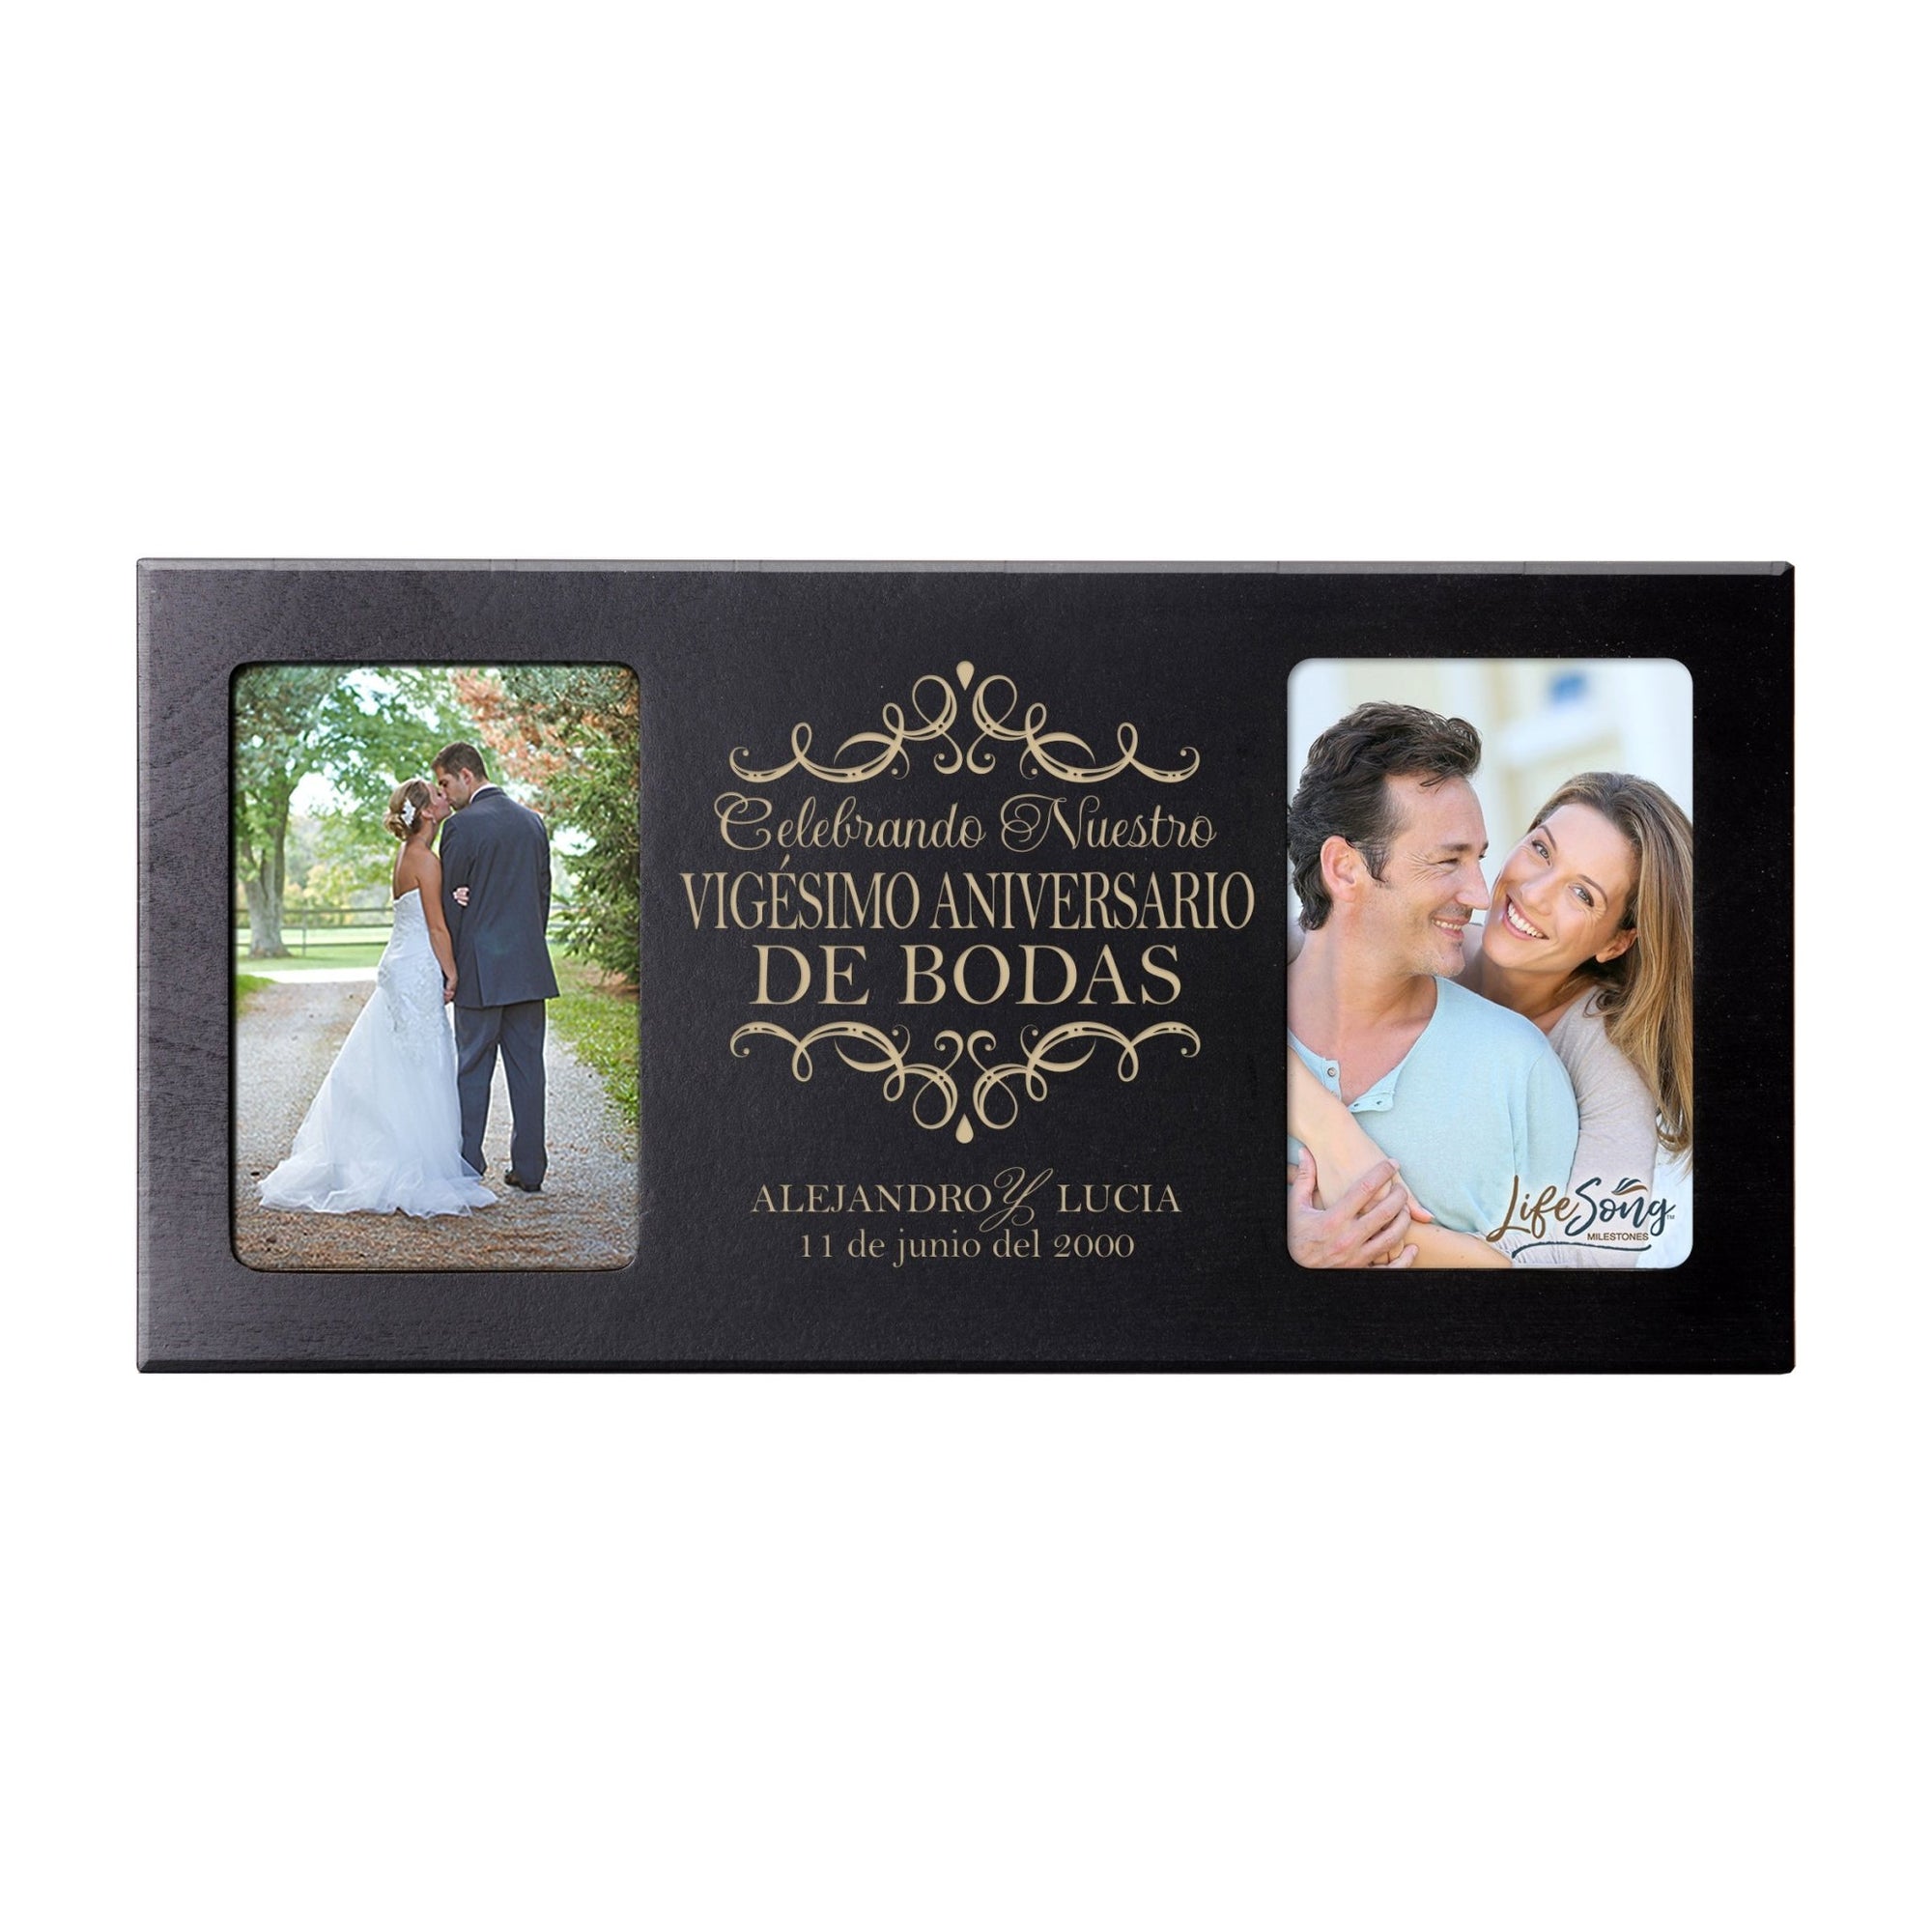 Personalized 20th Anniversary Picture Frame Holds 2-4x6 Photo (Spanish Verse) - LifeSong Milestones